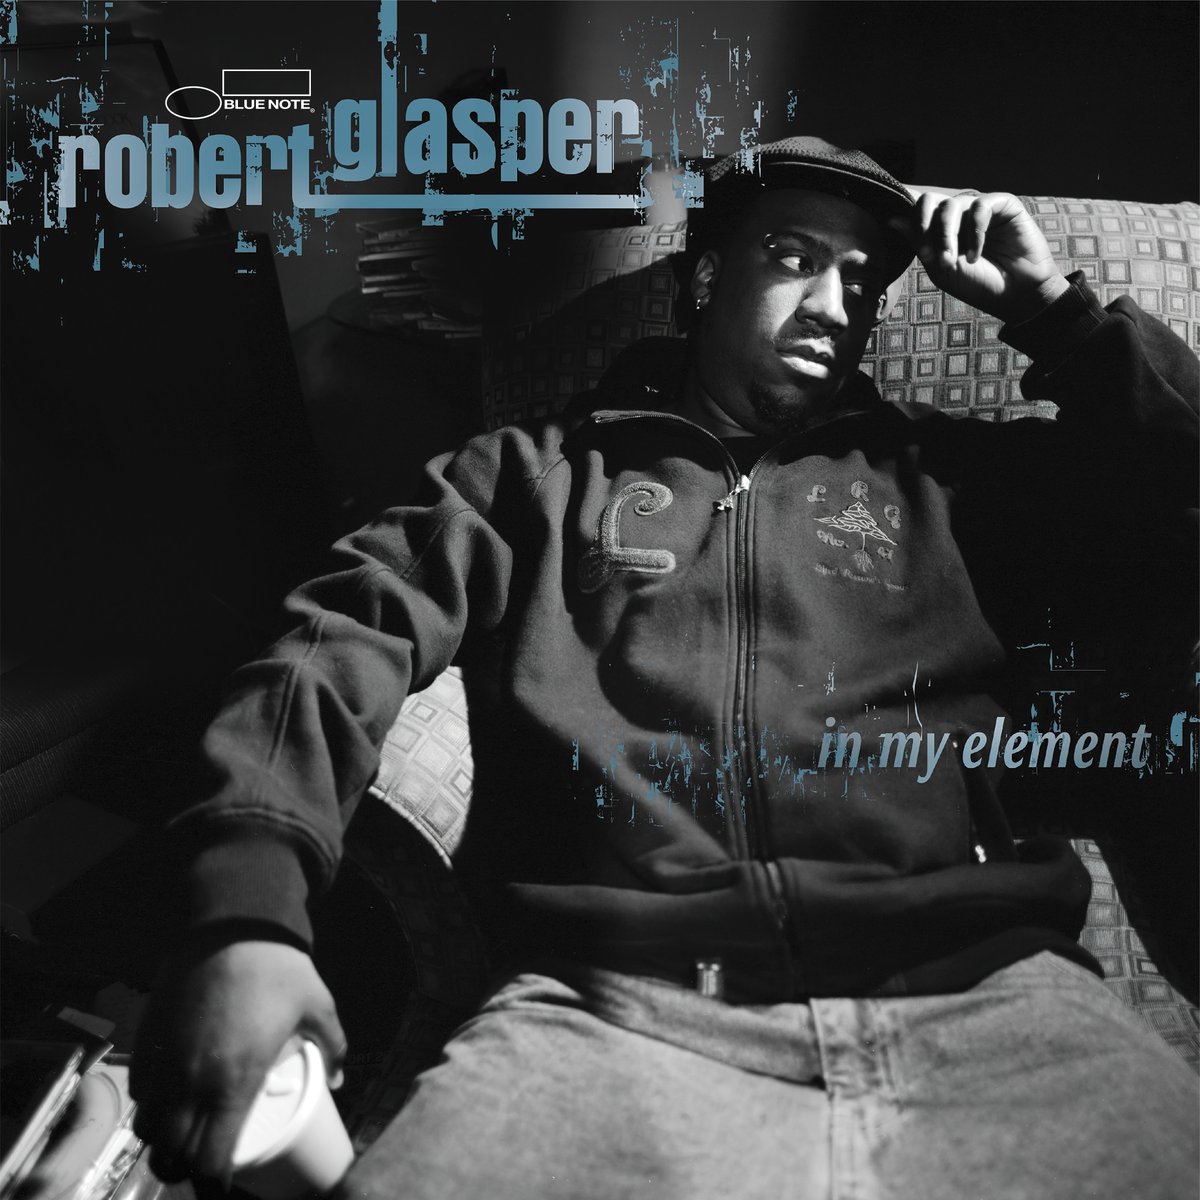 .@RobertGlasper’s 2007 album 'In My Element' featuring bassist Vicente Archer & drummer Damion Reid expanded the possibilities of where a modern jazz piano trio might go by delving further into his hip-hop & gospel roots. Classic Vinyl Edition out now: bluenote.lnk.to/RobertGlasper-…